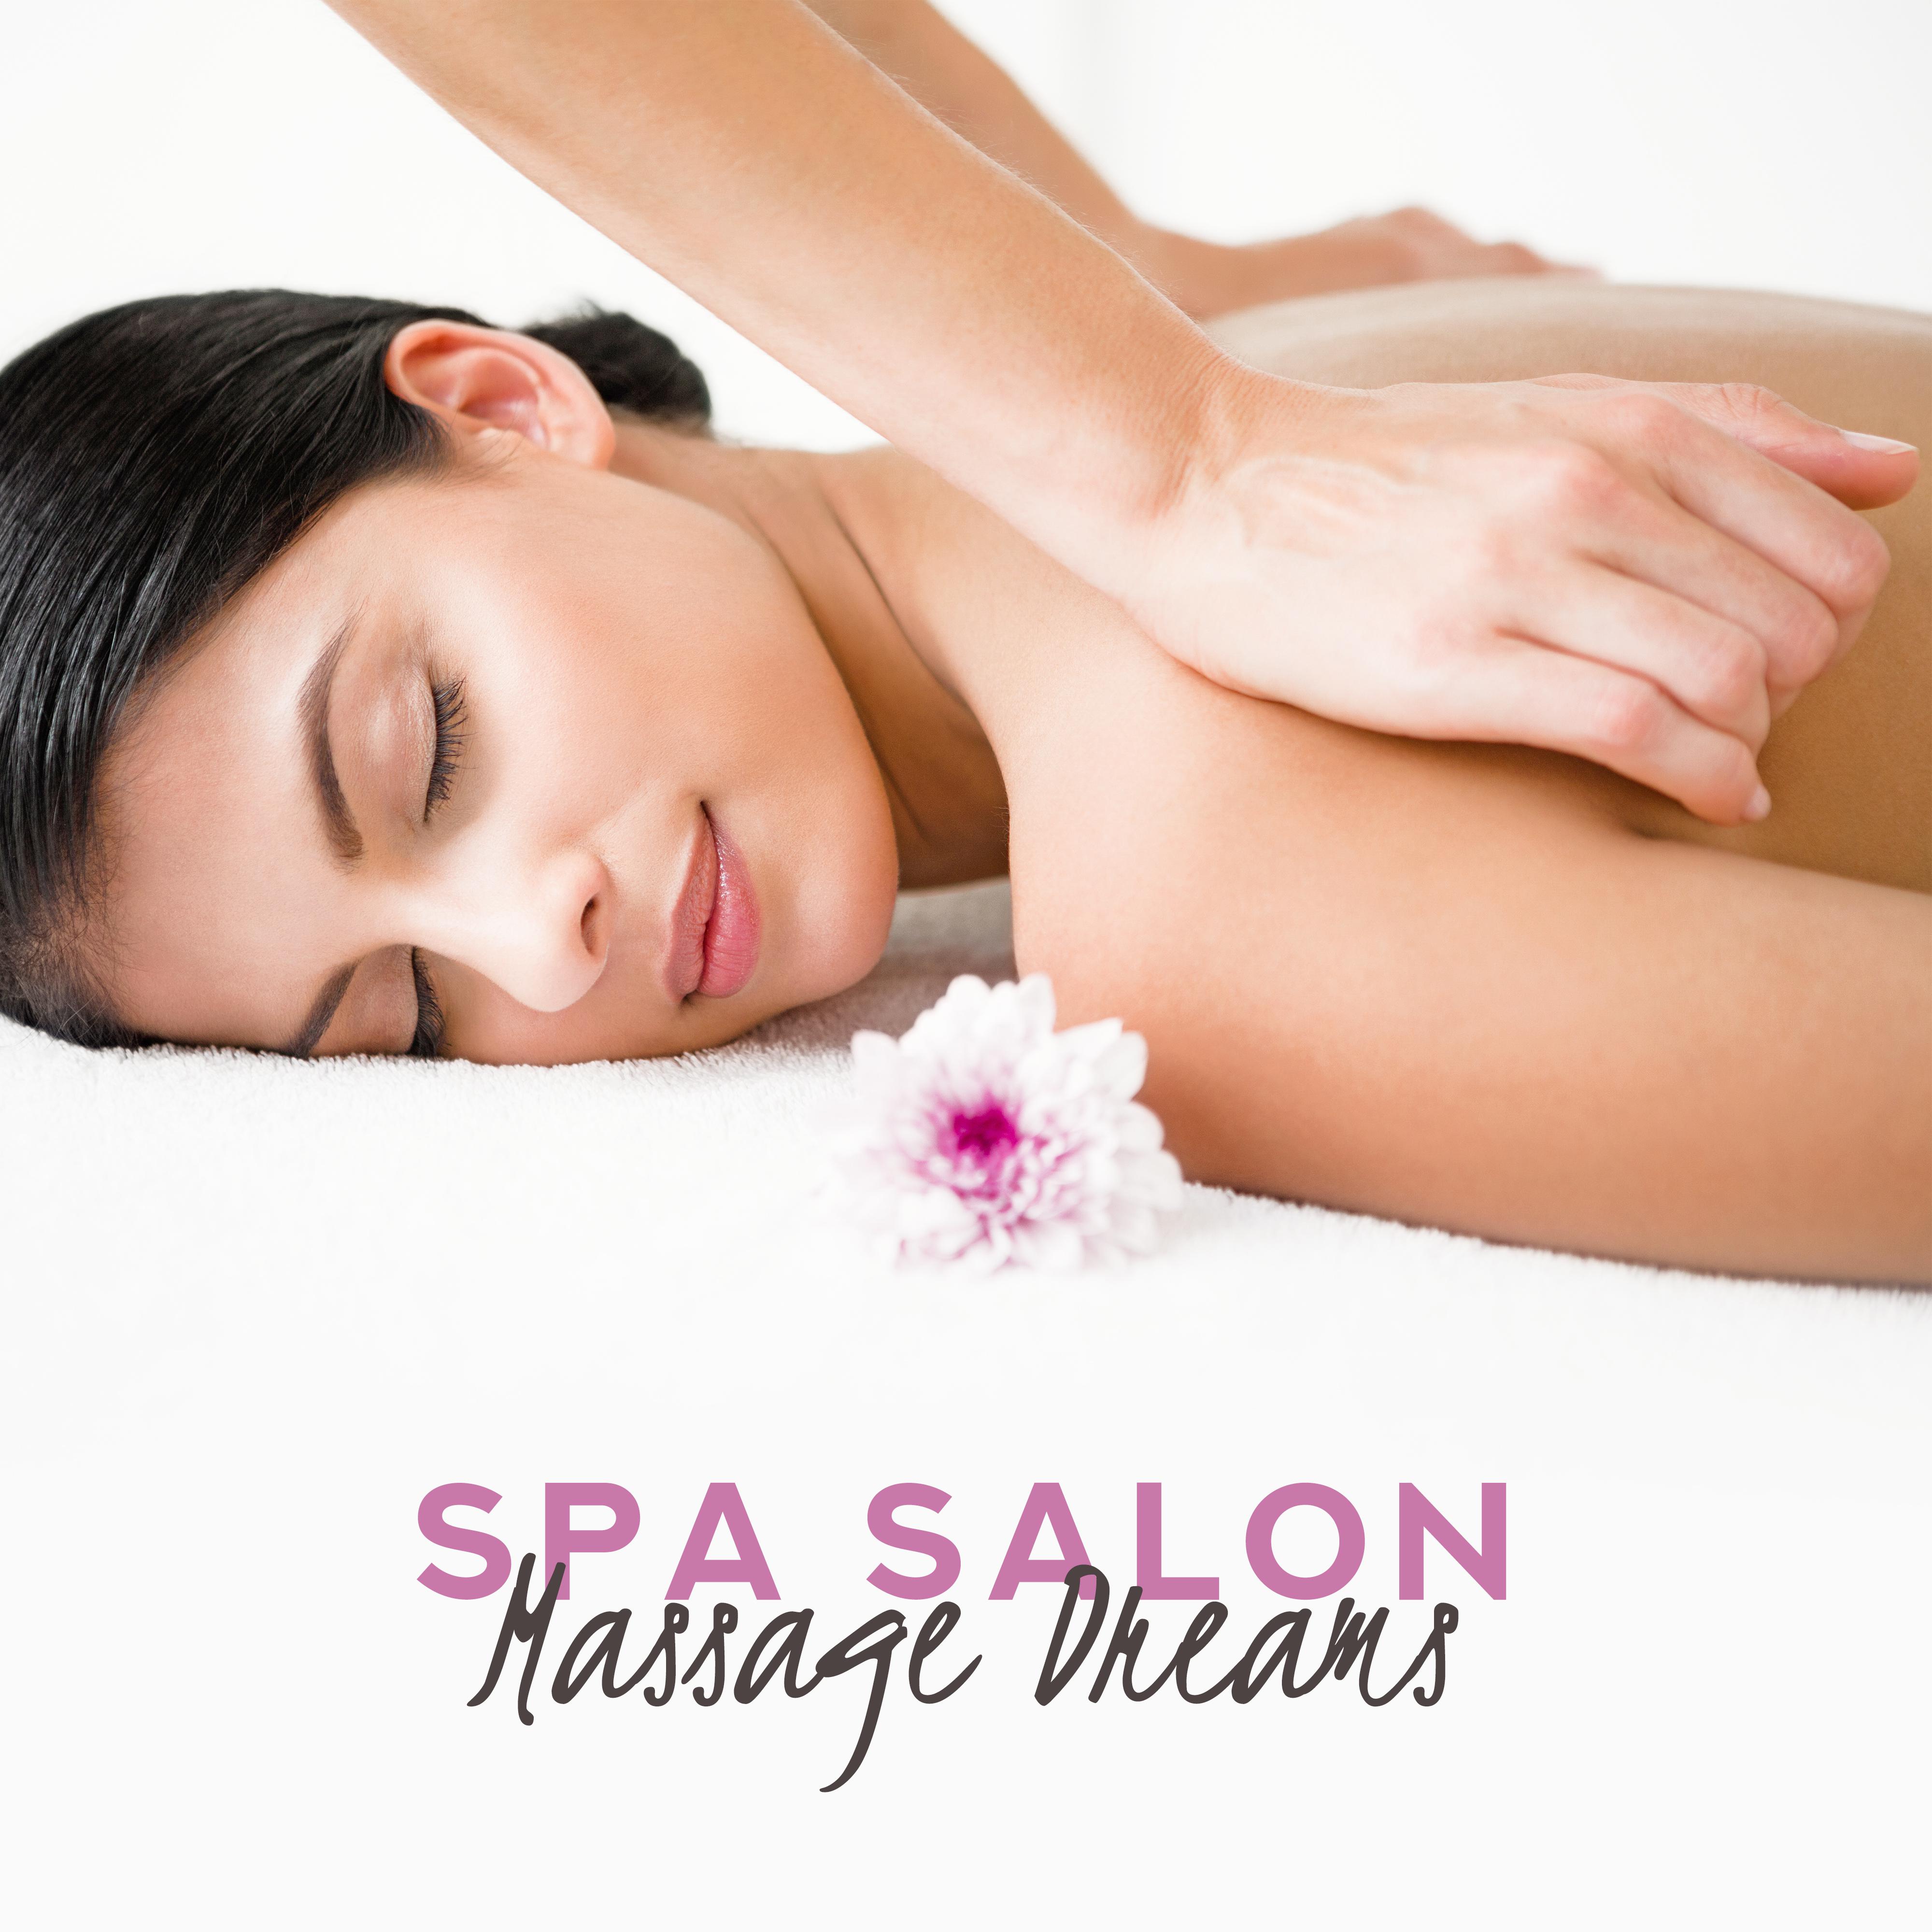 Spa Salon Massage Dreams: 2019 New Age Music for Spa Salon, Wellness, Massage Therapy, Deep Relaxation